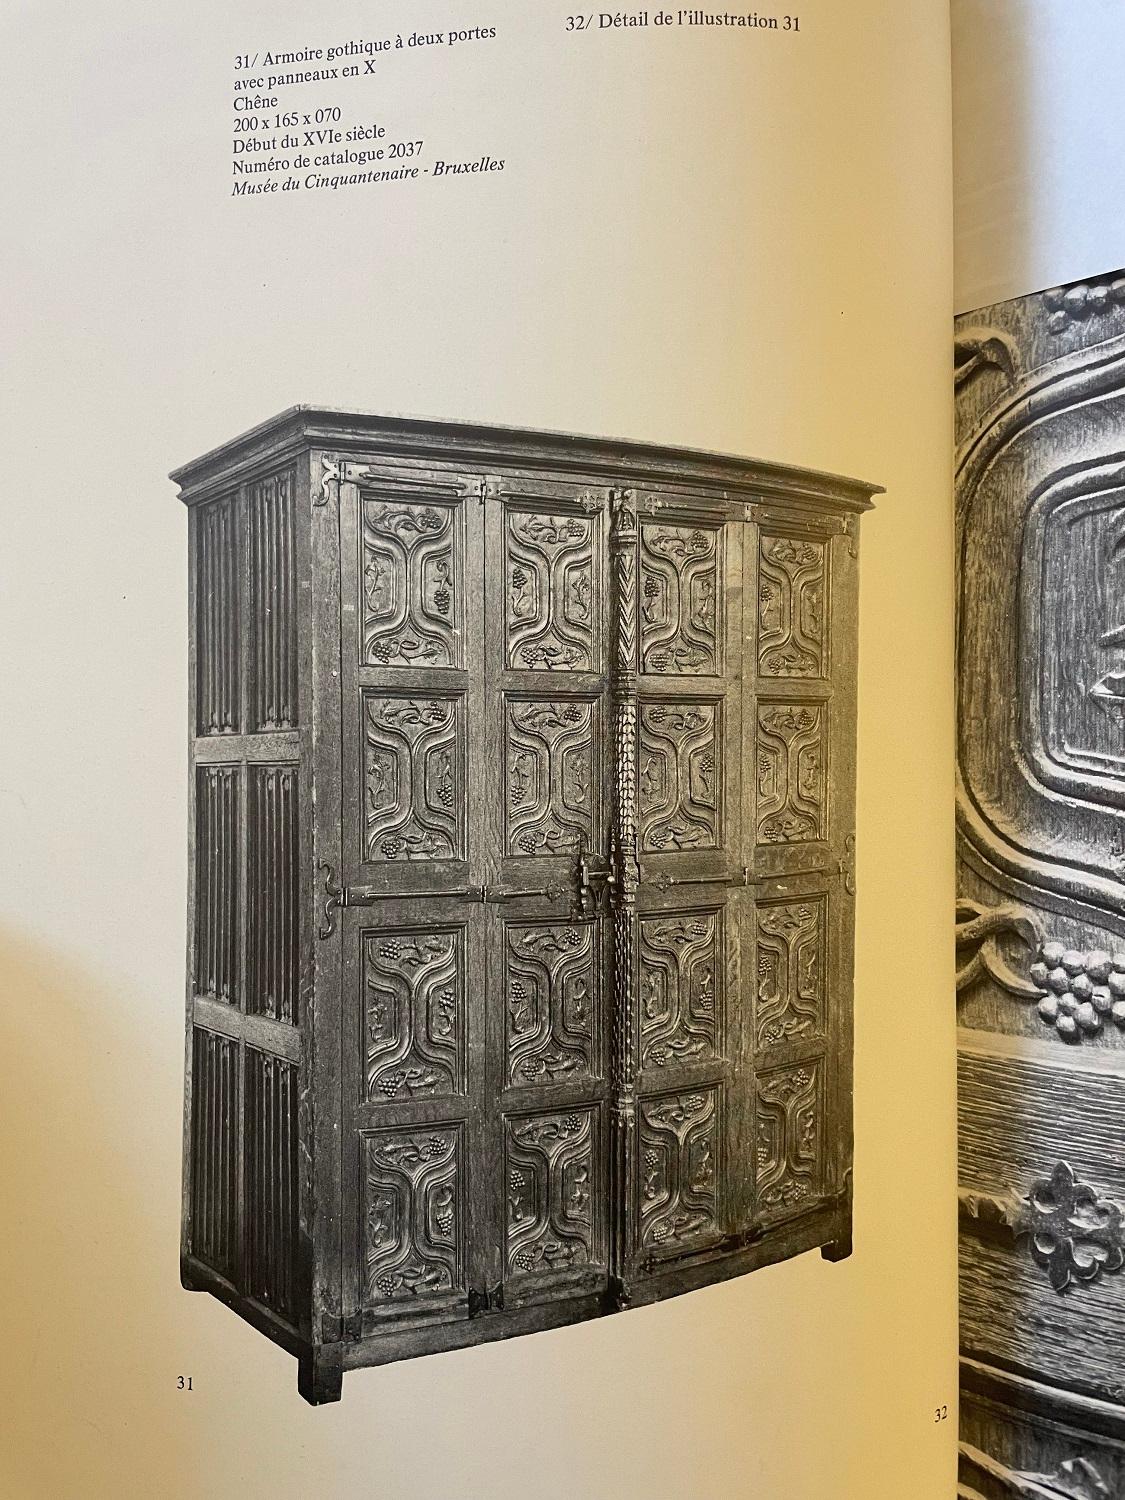 exceptional and very rare Gothic 4 doors buffet or wardrobe in oak, 15th century period from the north of France.

This rare gothic piece open with 4 stylized plant decoration door, each with its original entrance, lockand hinges each in their